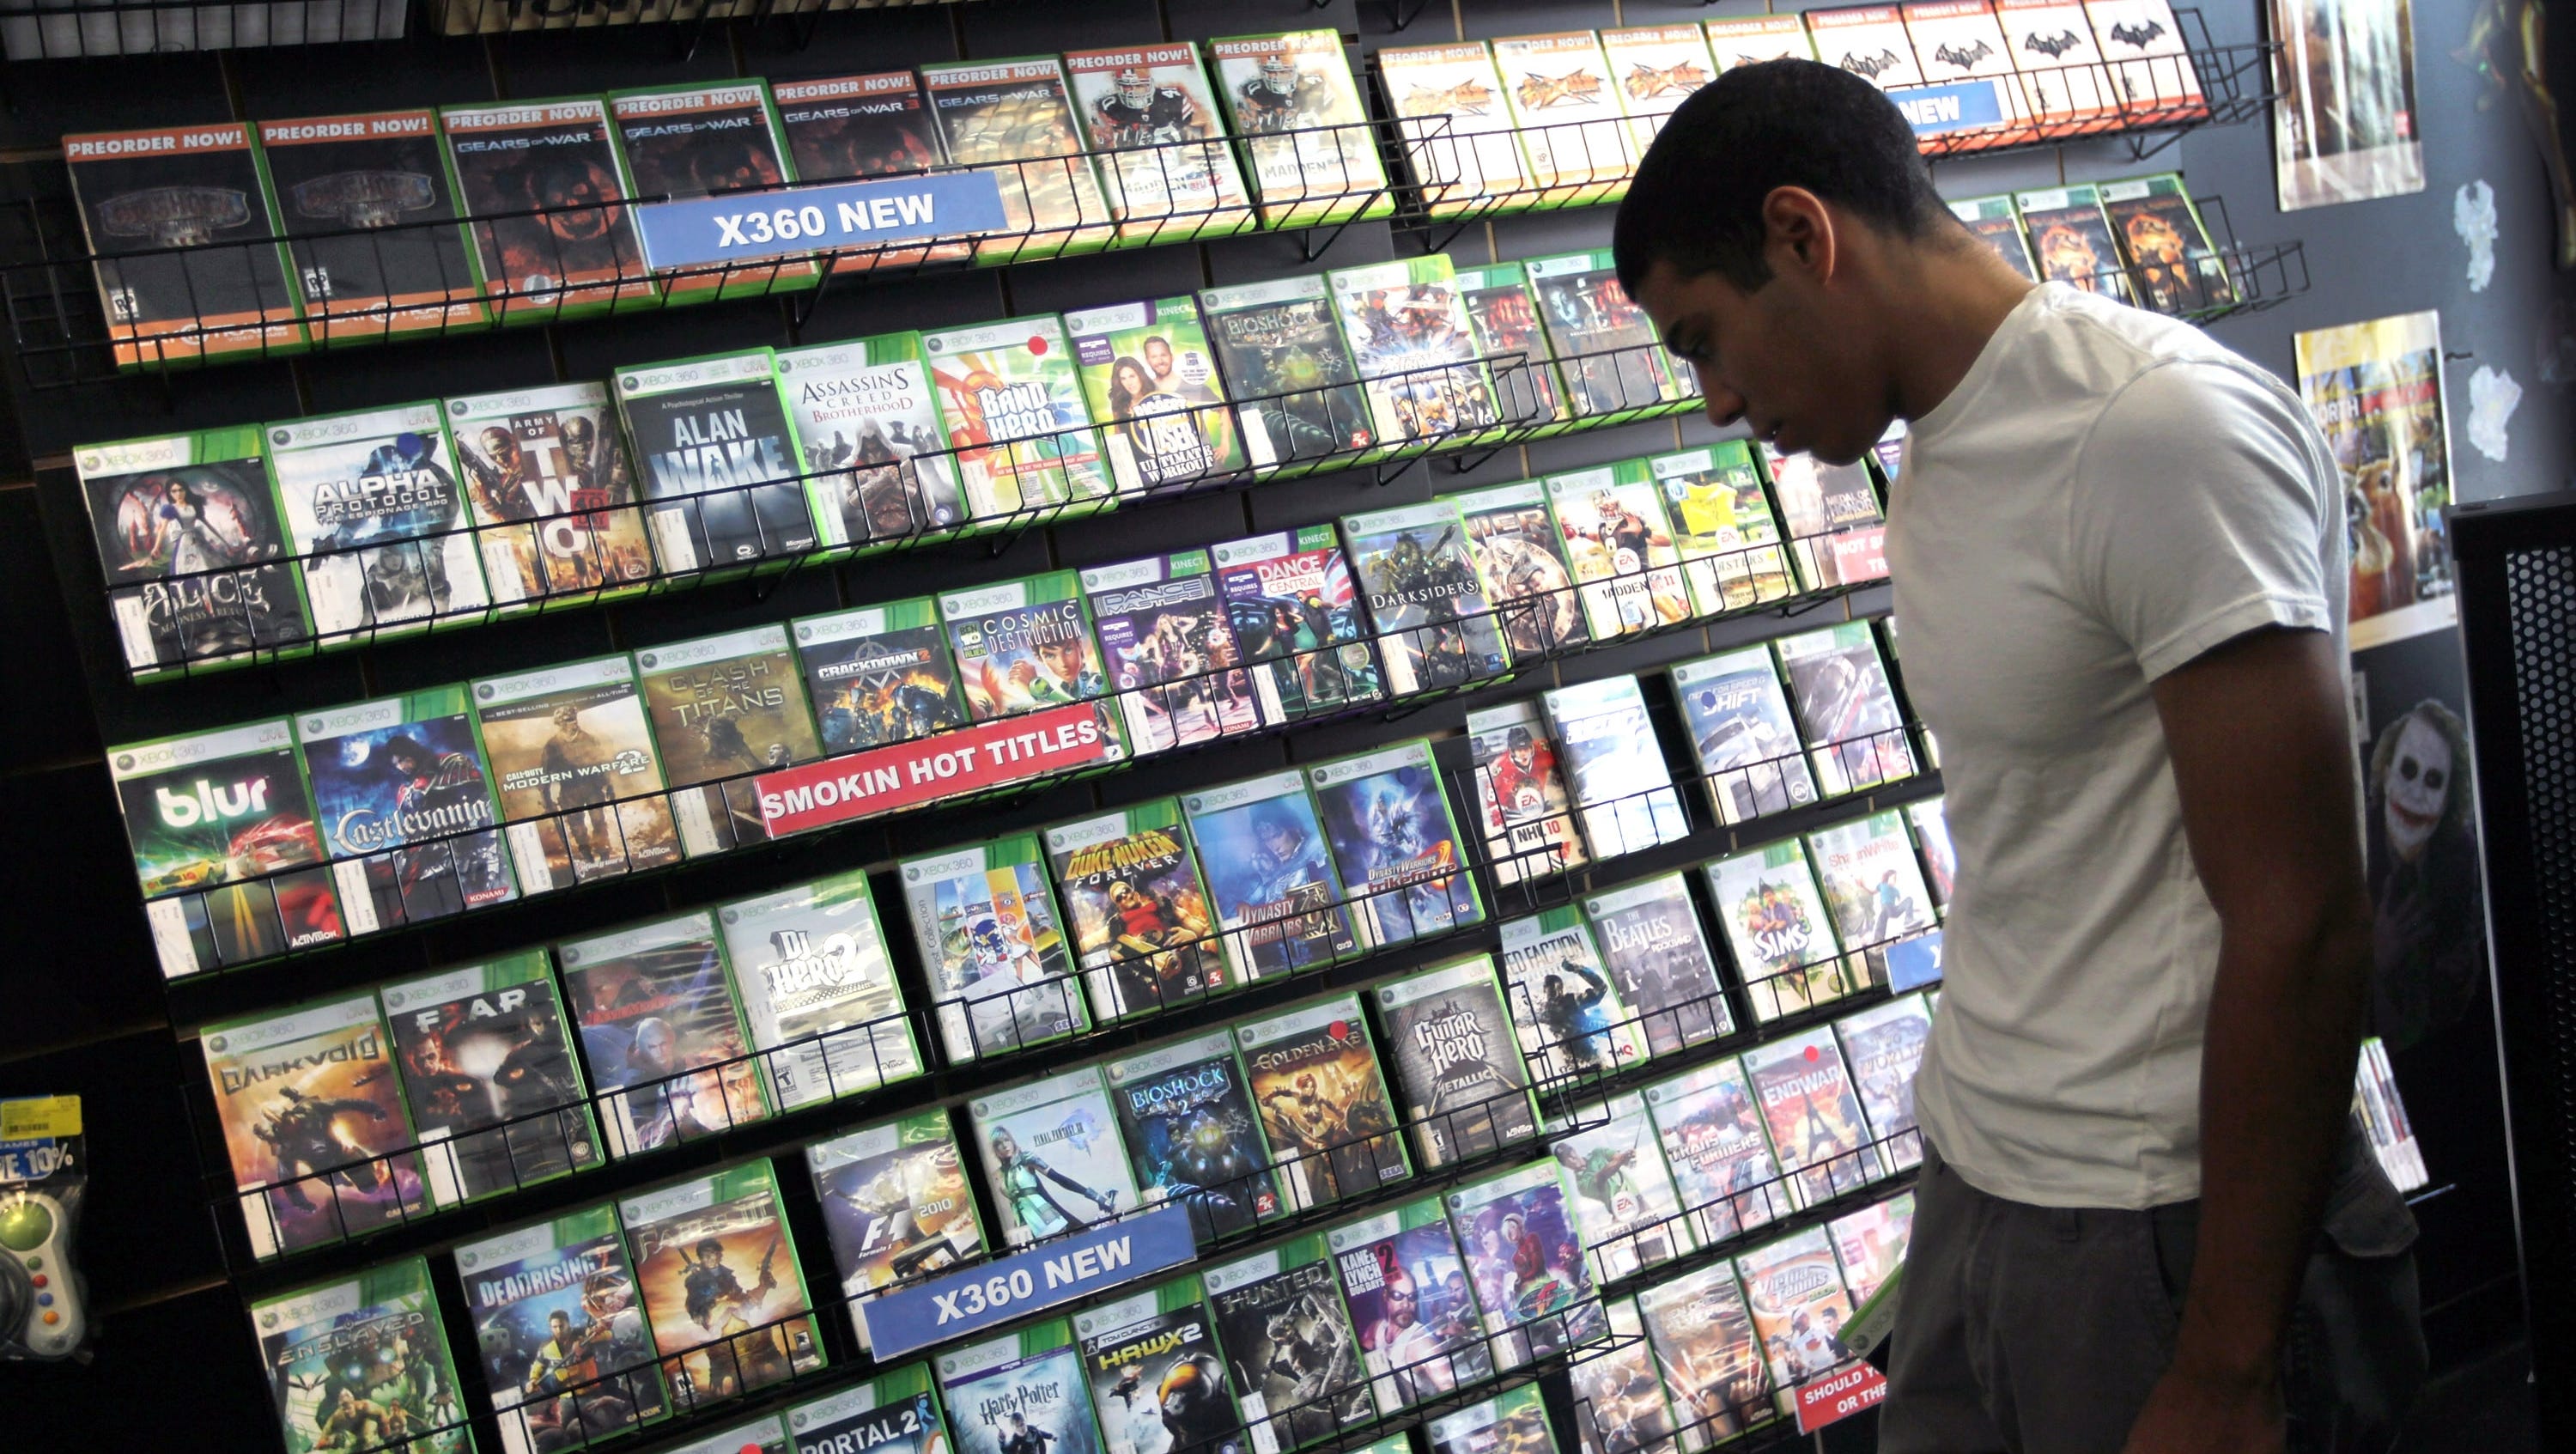 where to purchase video games